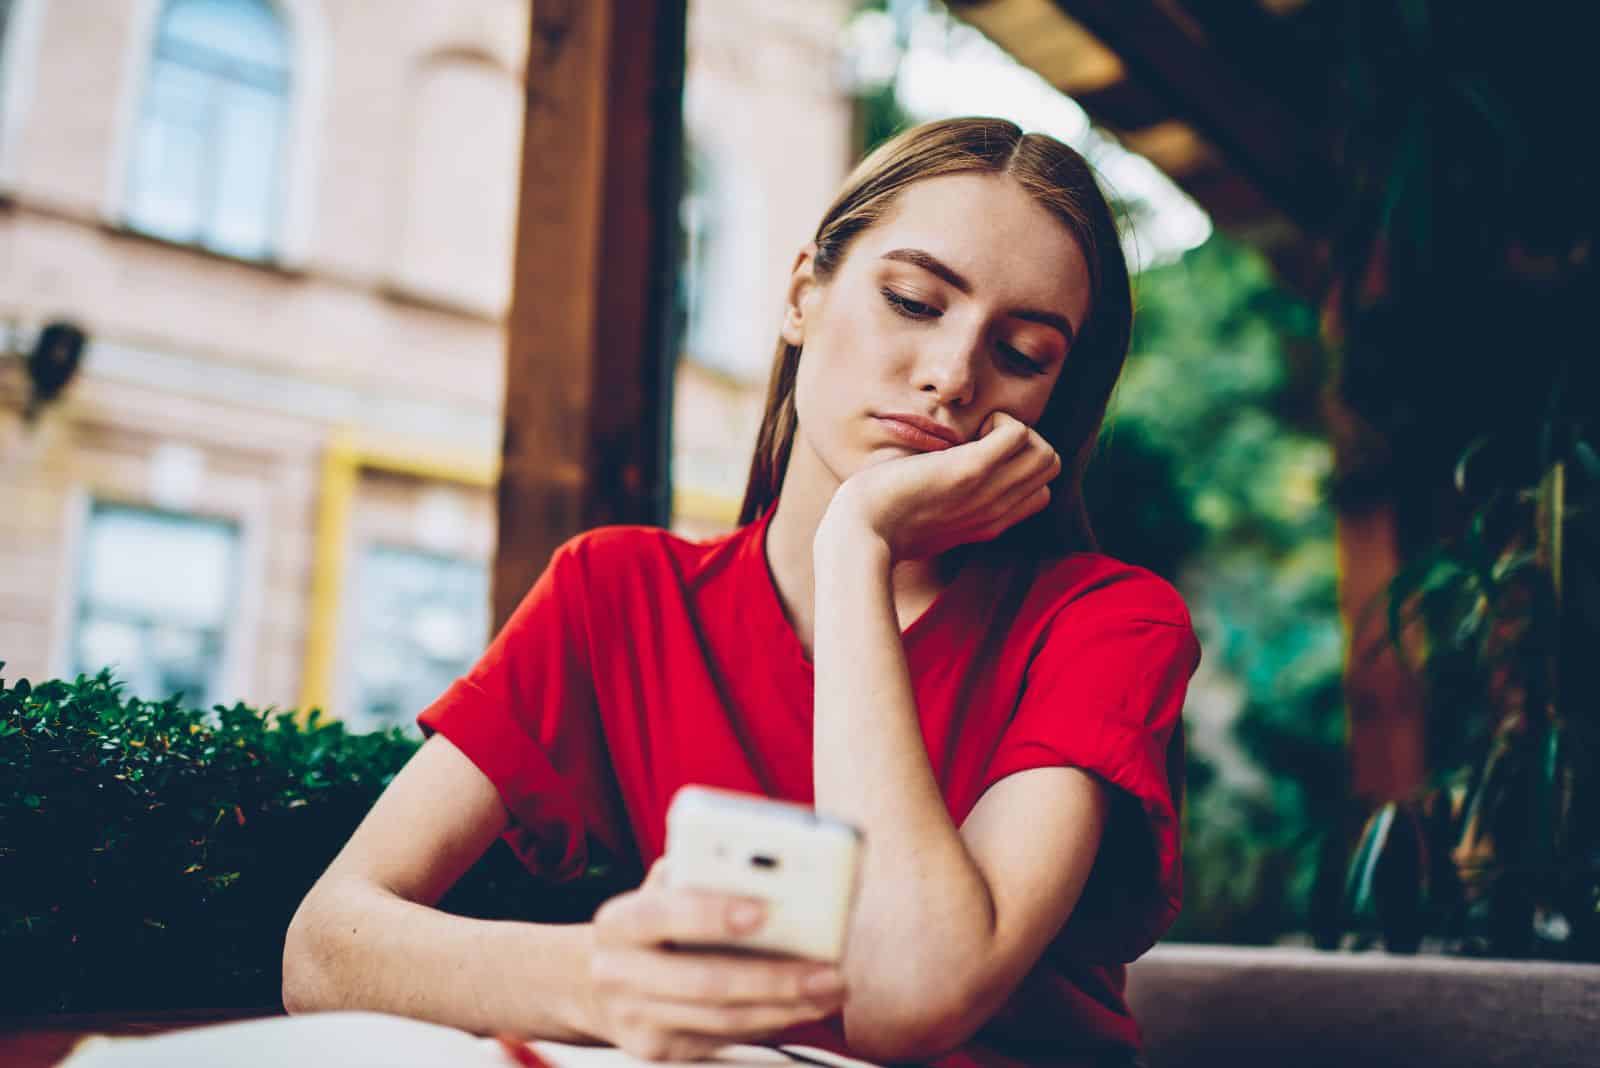 a thoughtful girl is sitting with a phone in her hand